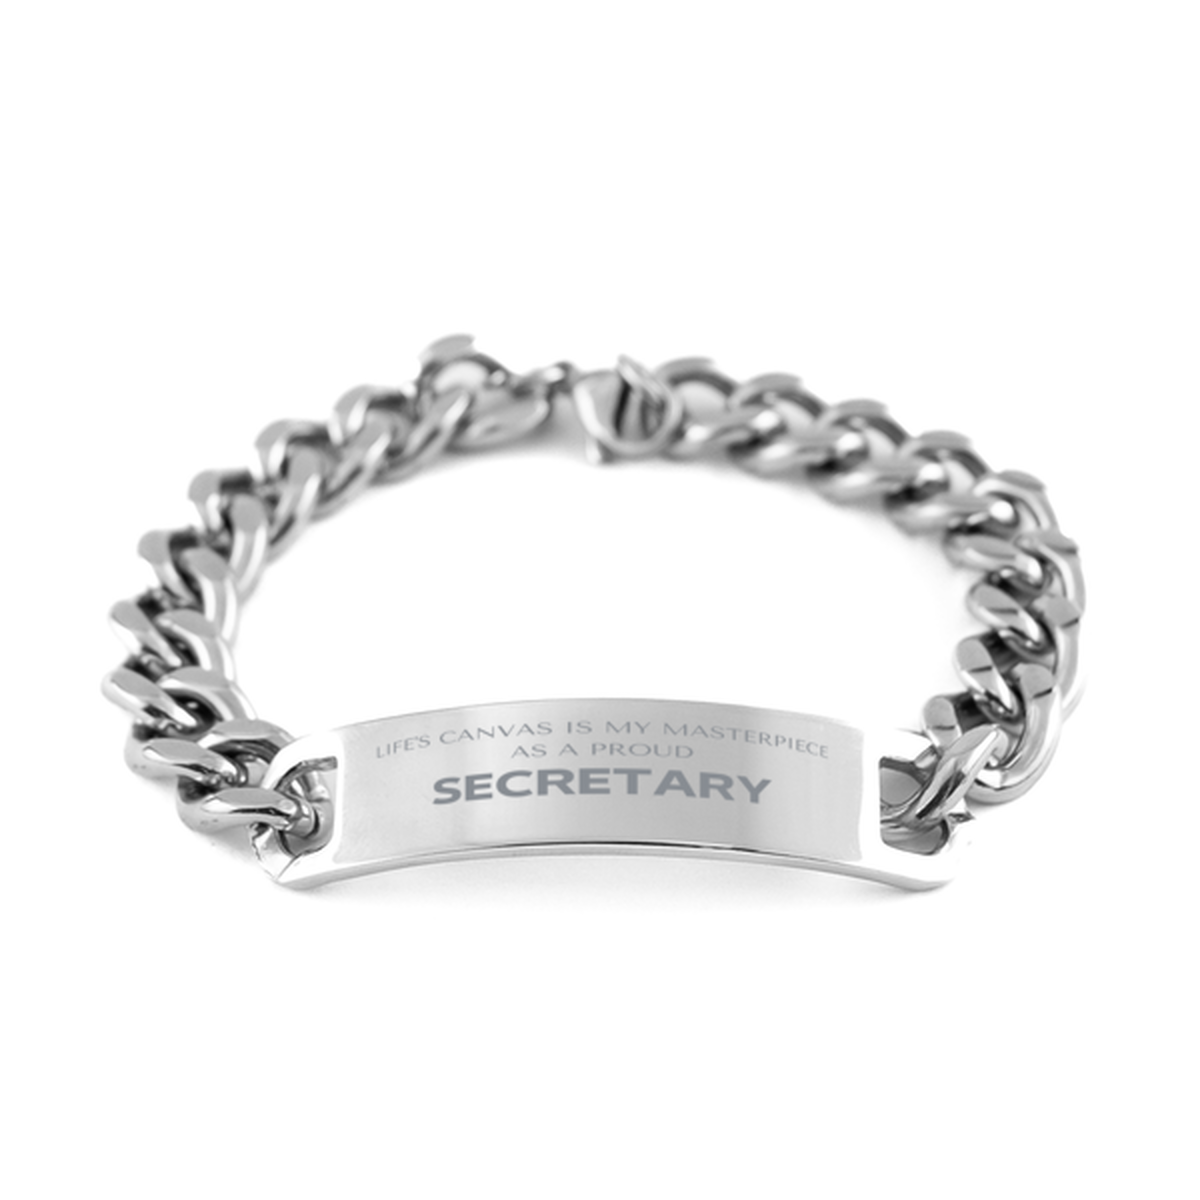 Proud Secretary Gifts, Life's canvas is my masterpiece, Epic Birthday Christmas Unique Cuban Chain Stainless Steel Bracelet For Secretary, Coworkers, Men, Women, Friends